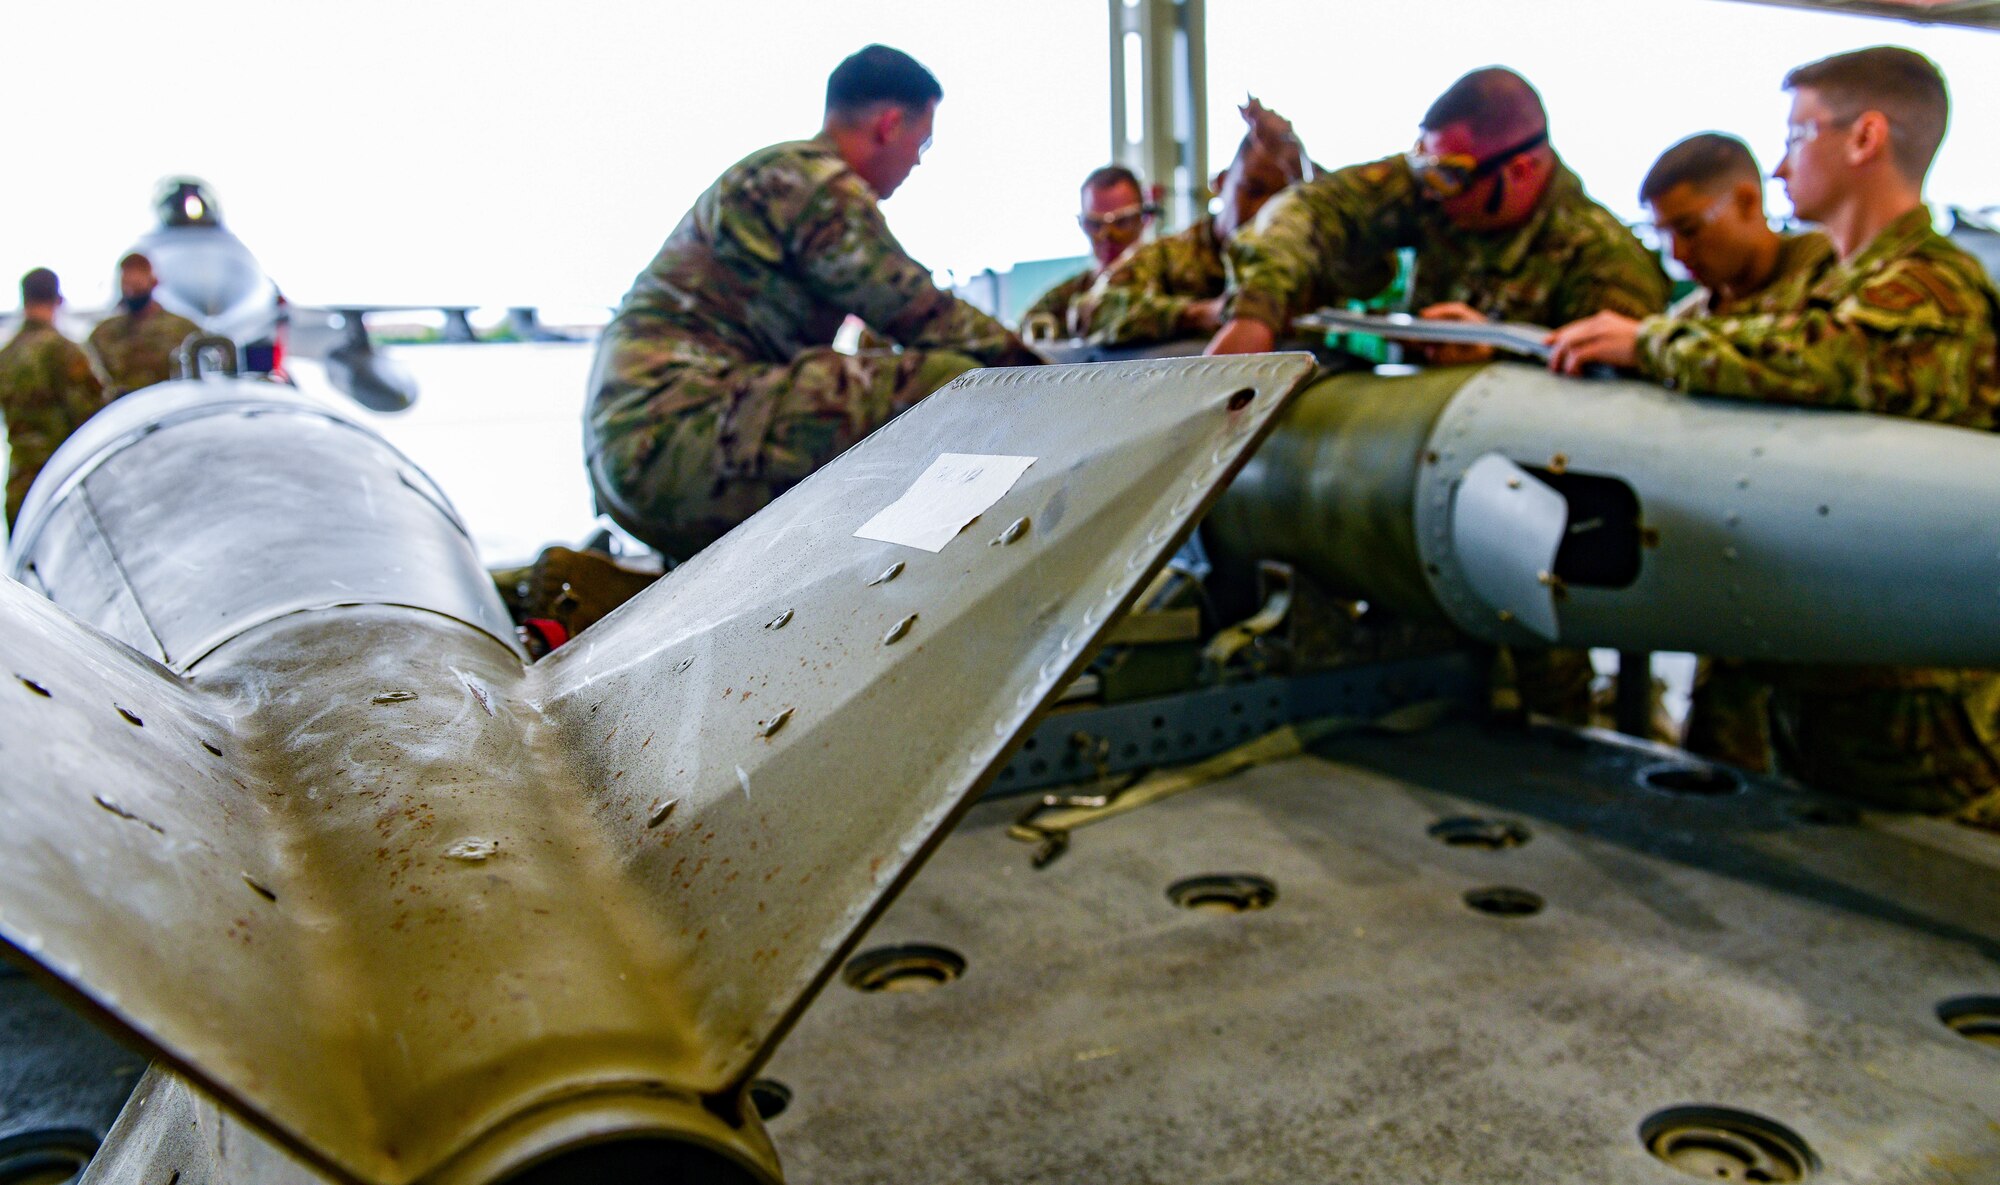 U.S. Airmen assigned to the 31st Munitions Squadron build an inert munition during the 3rd quarter Rapid Aircraft Generation and Employment (RAGE) event at Aviano Air Base, Italy, Oct. 7, 2021. RAGE showcases Aviano’s lethal combat capabilities and prove Agile Combat Employment (ACE) effectiveness through demonstrations and competitions. (U.S. Air Force photo by Senior Airman Brooke Moeder)